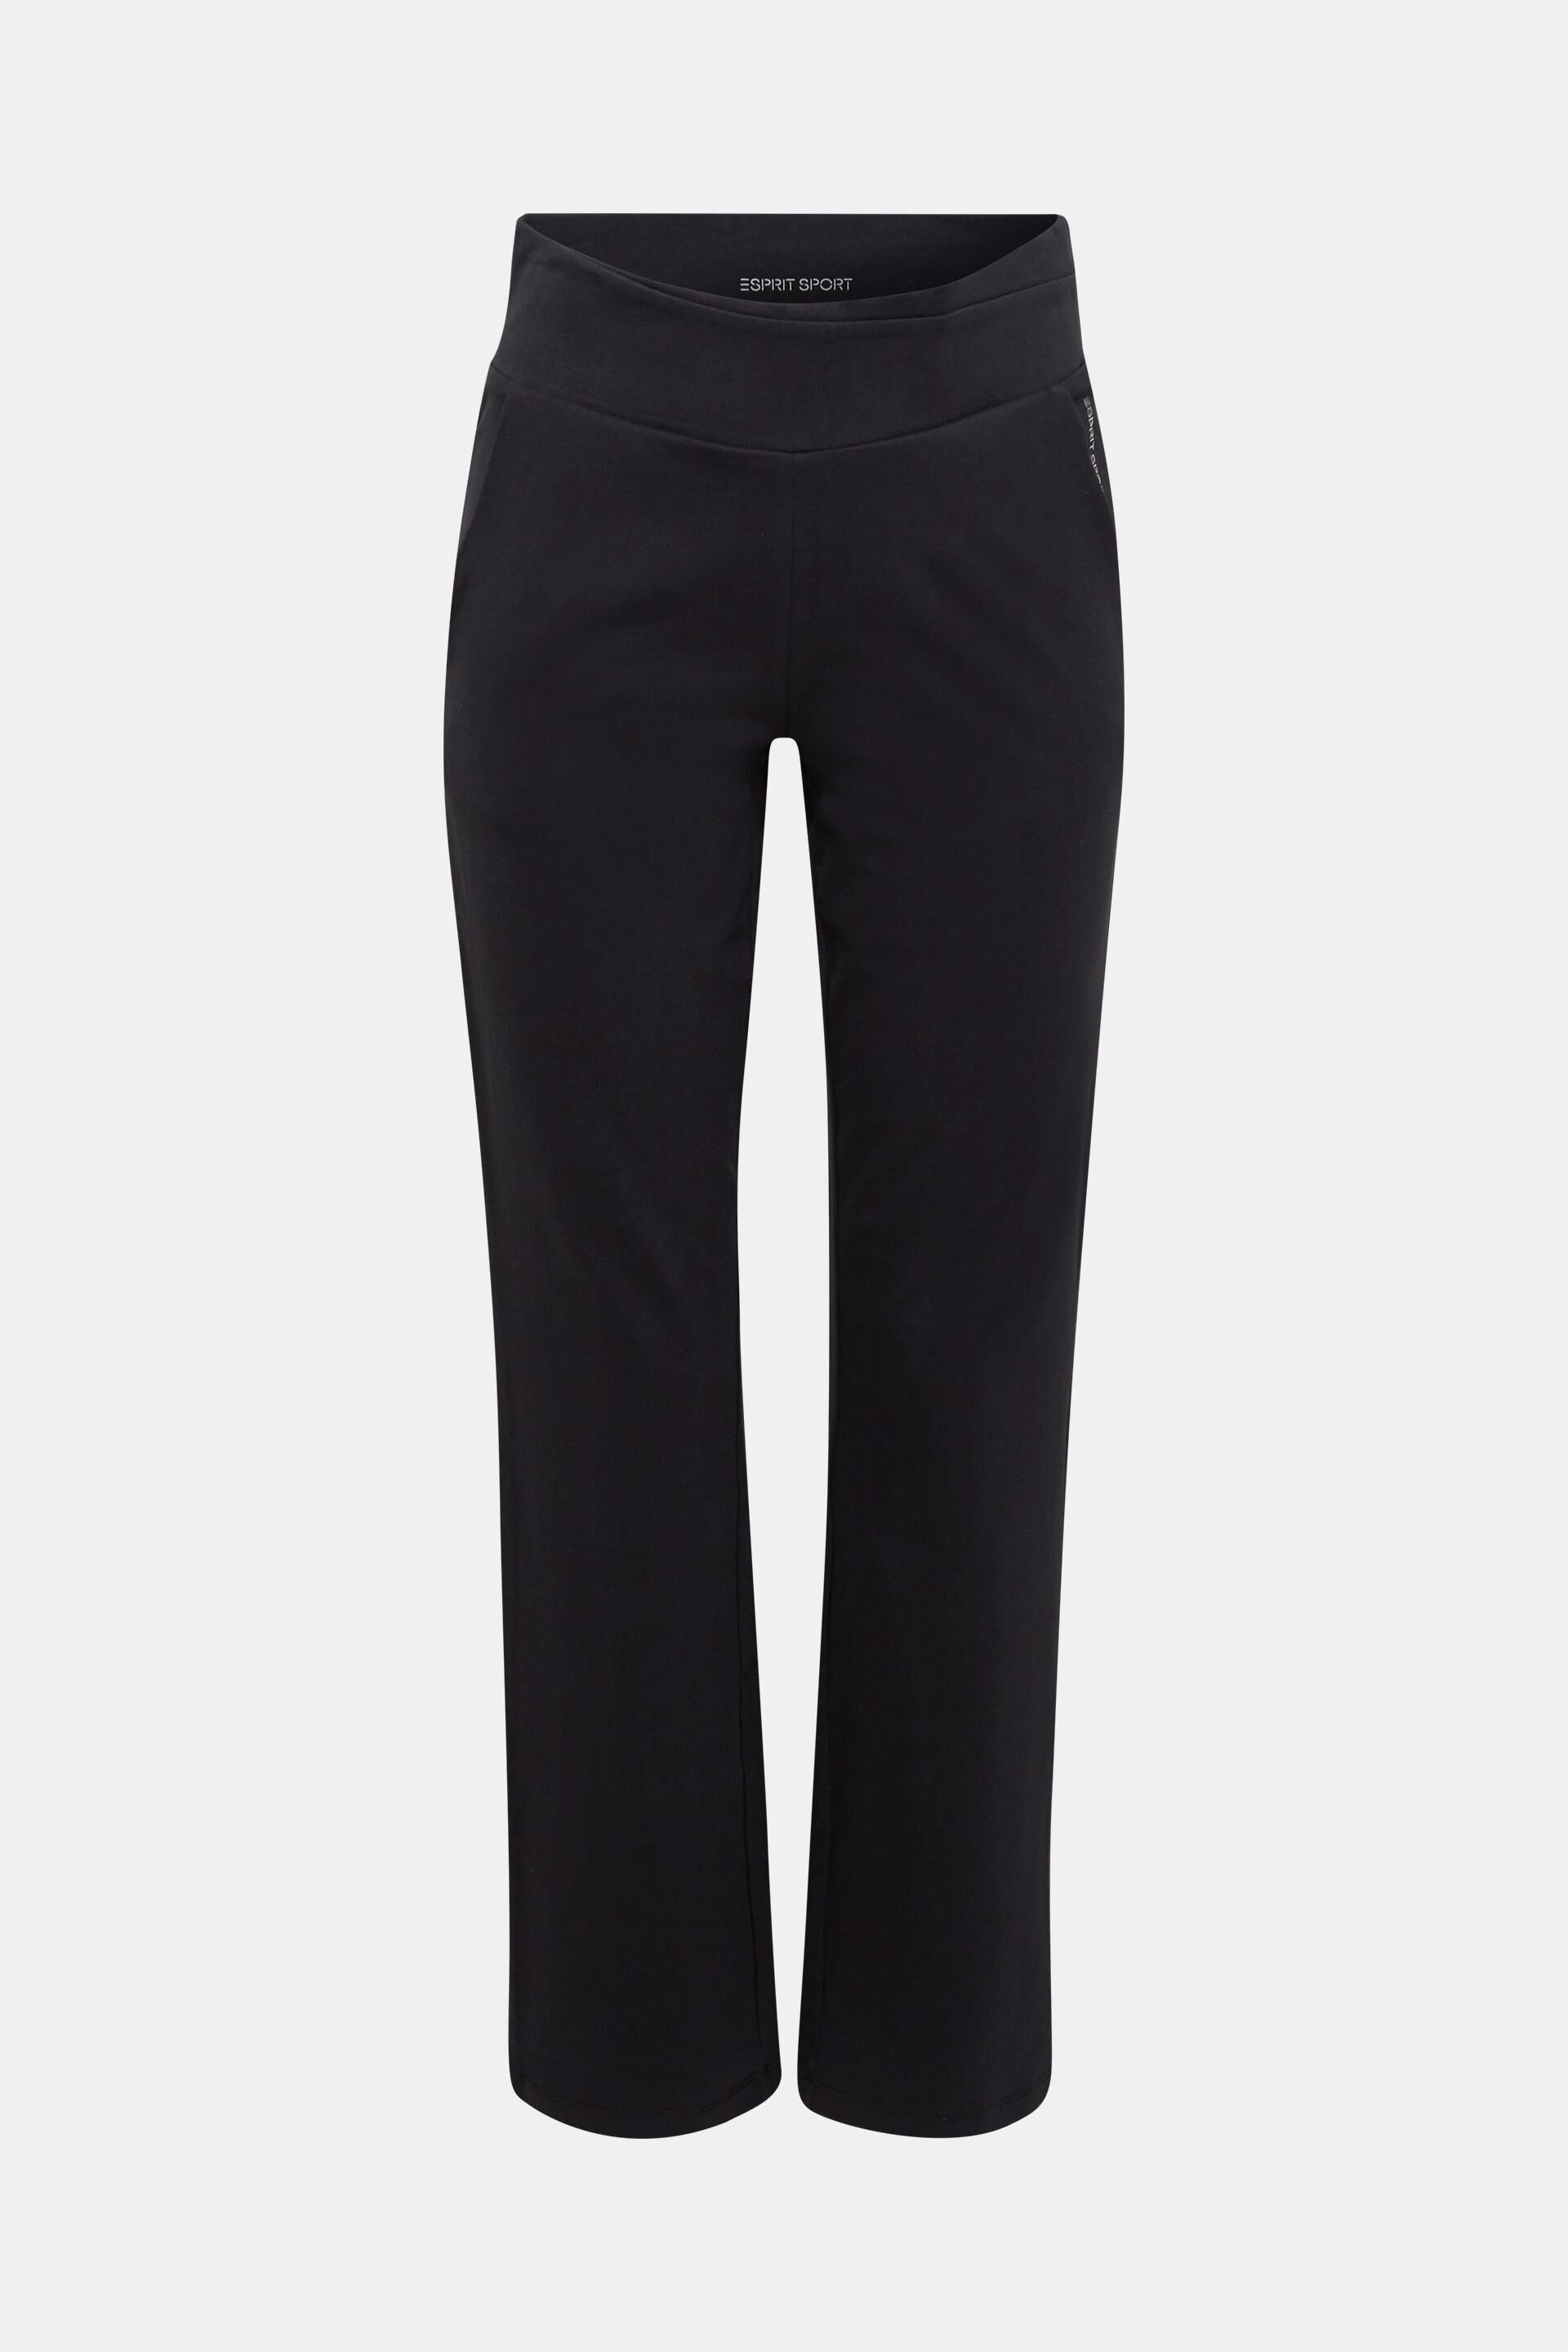 Esprit of cotton made trousers organic Jersey